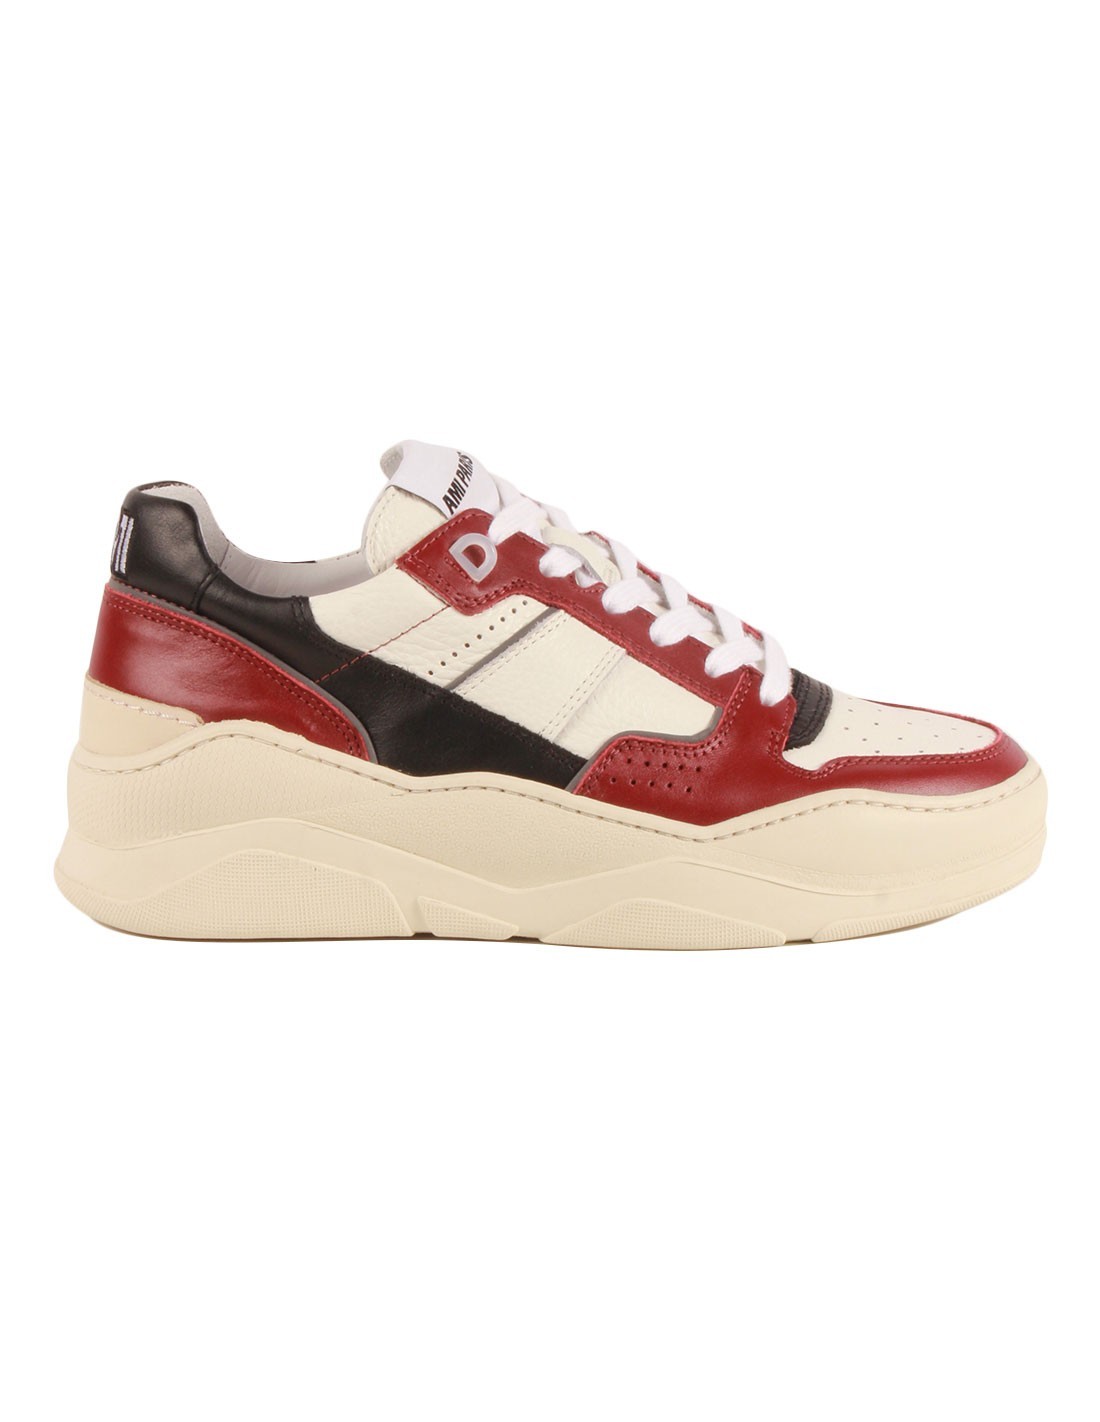 AMI PARIS low-top sneakers with thick sole in burgundy